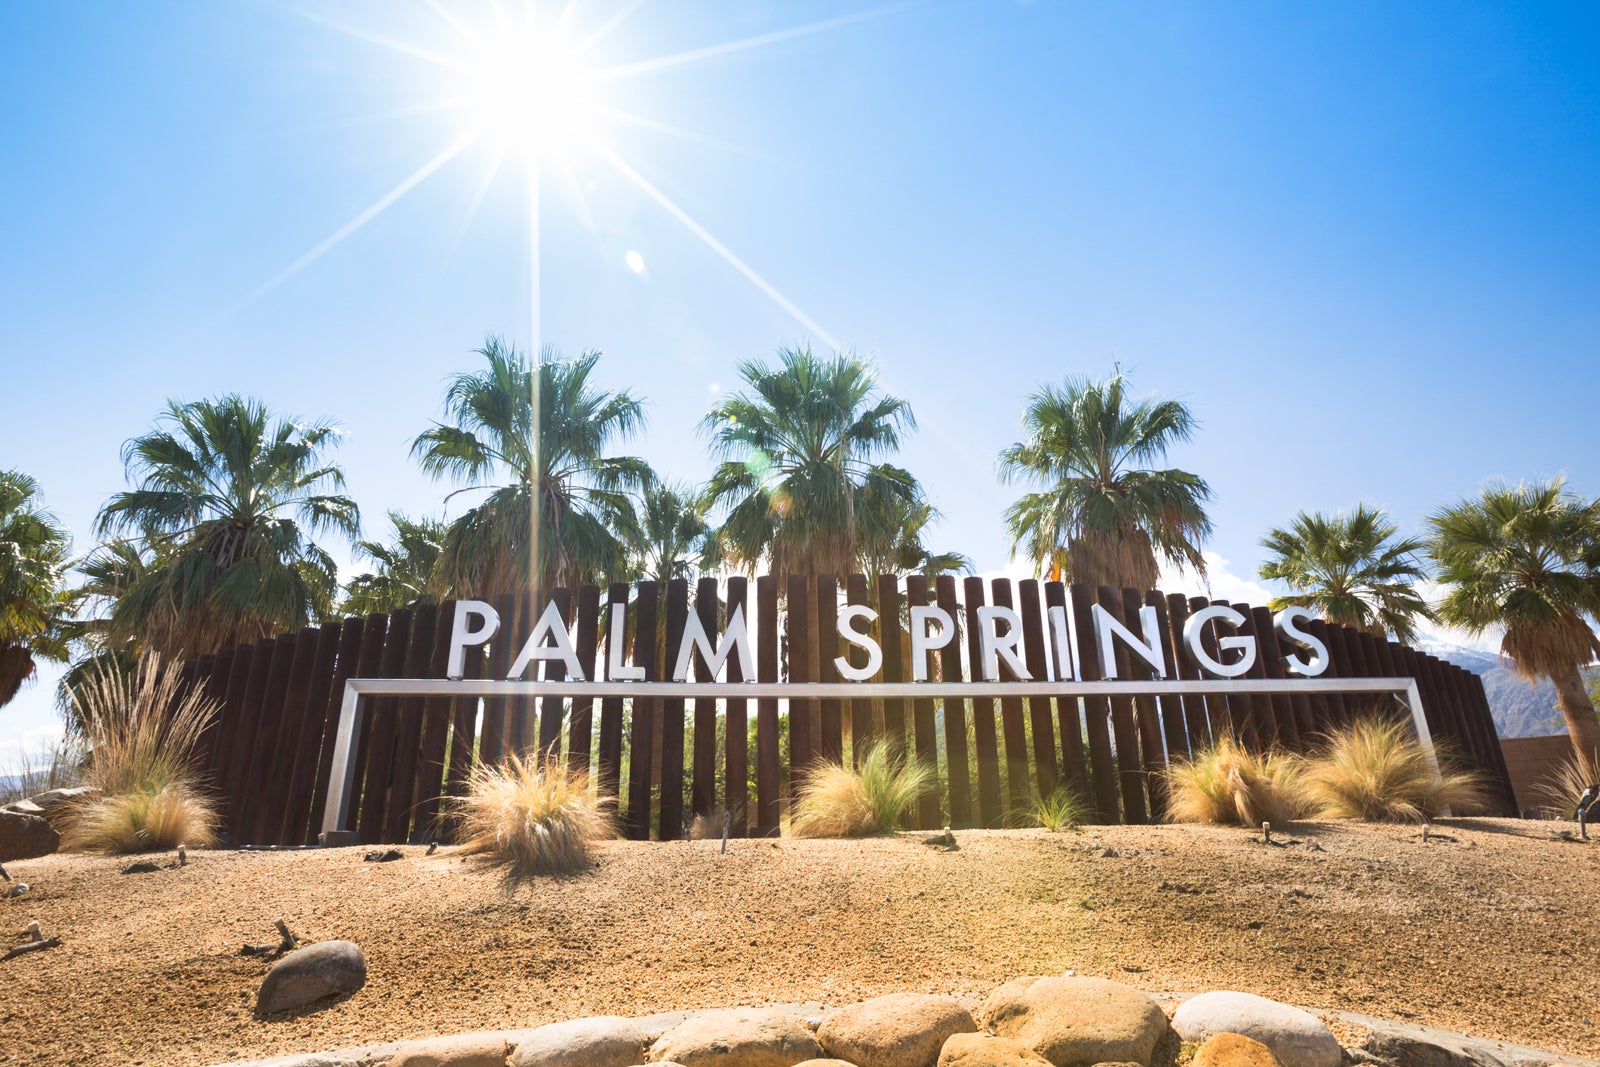 Palm Springs welcome sign